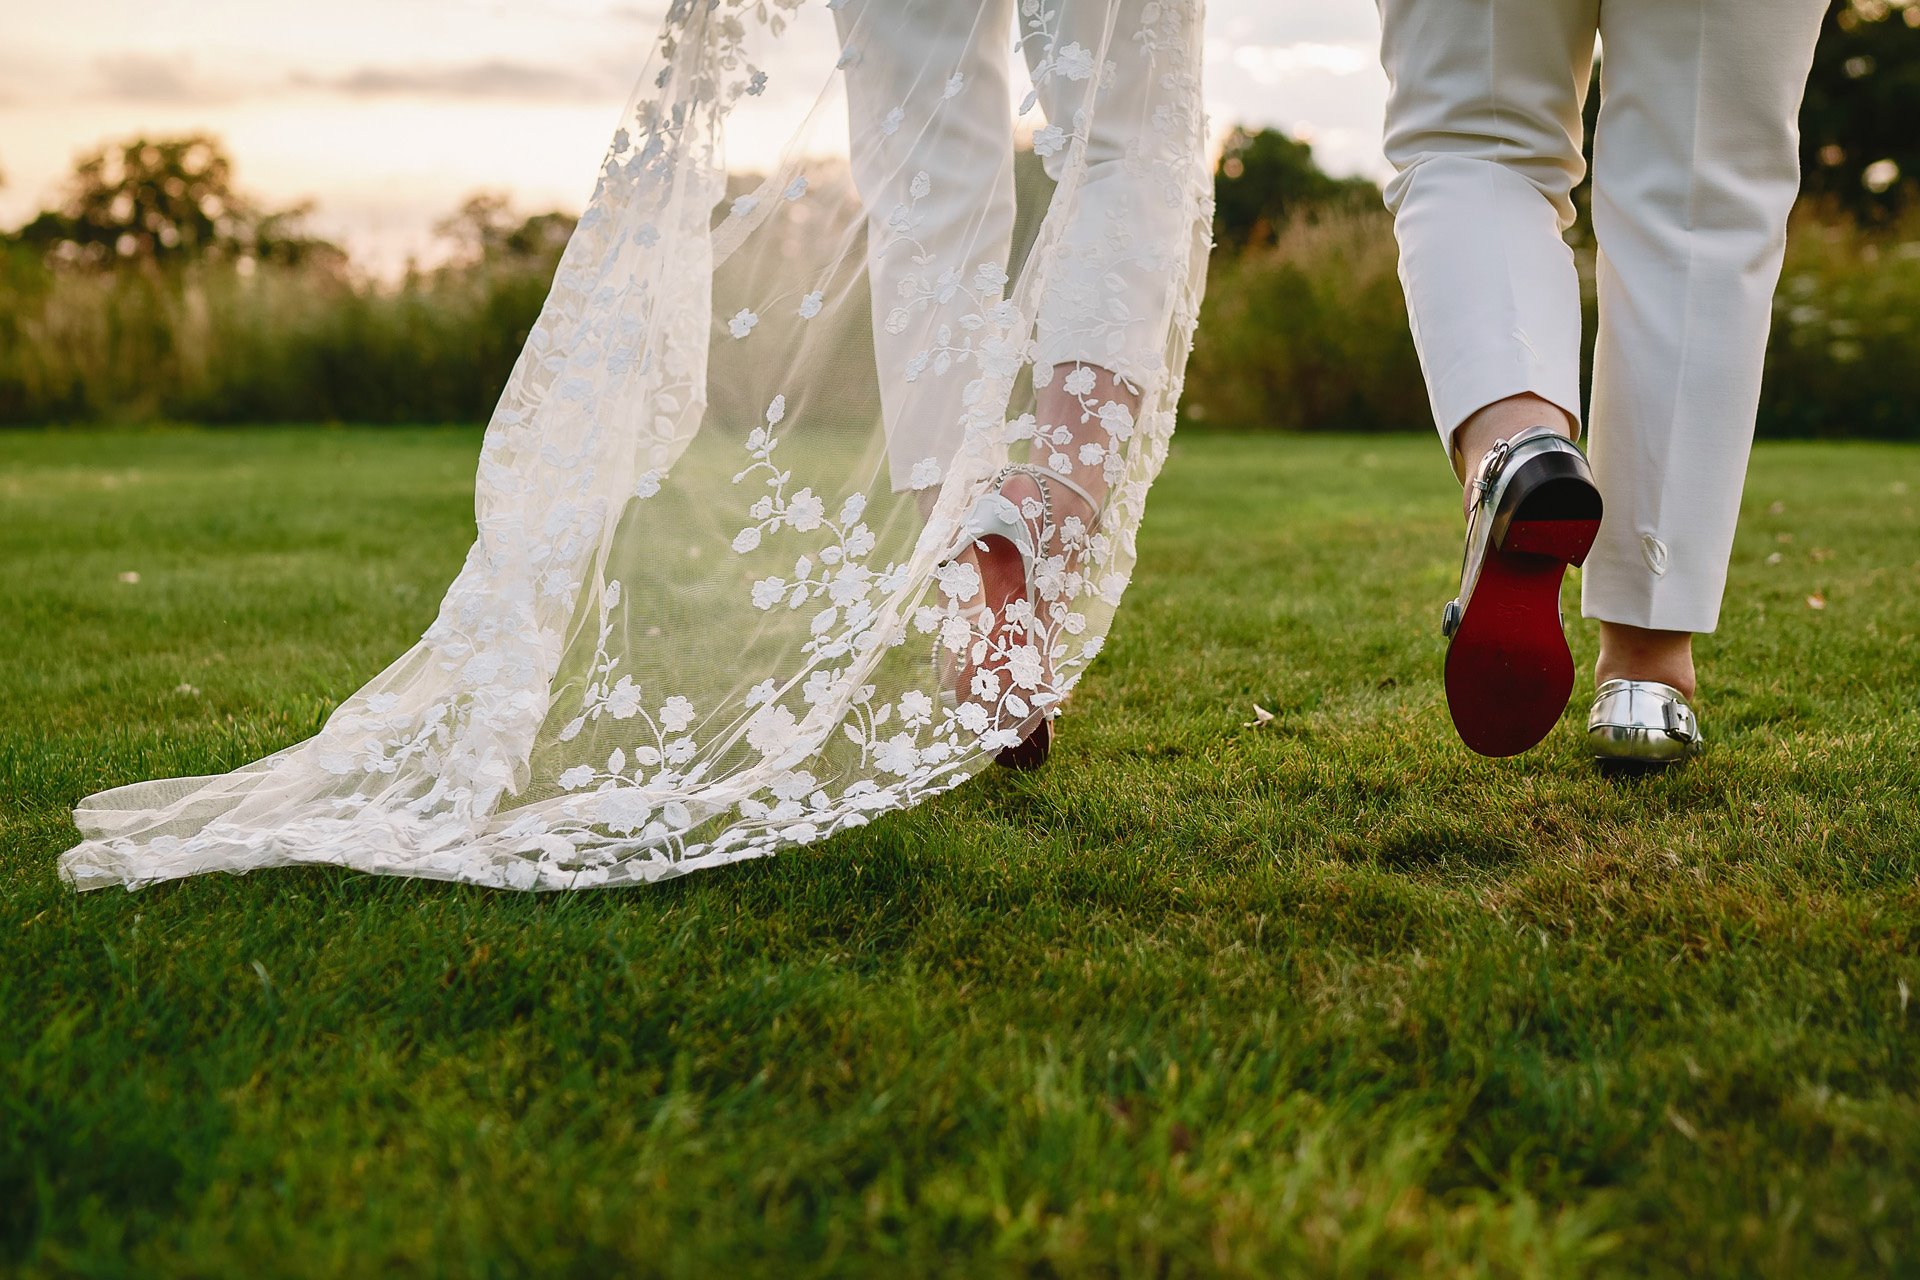 Two brides wearing Louboutin's walking into the sunset on their wedding day at Elmore Court